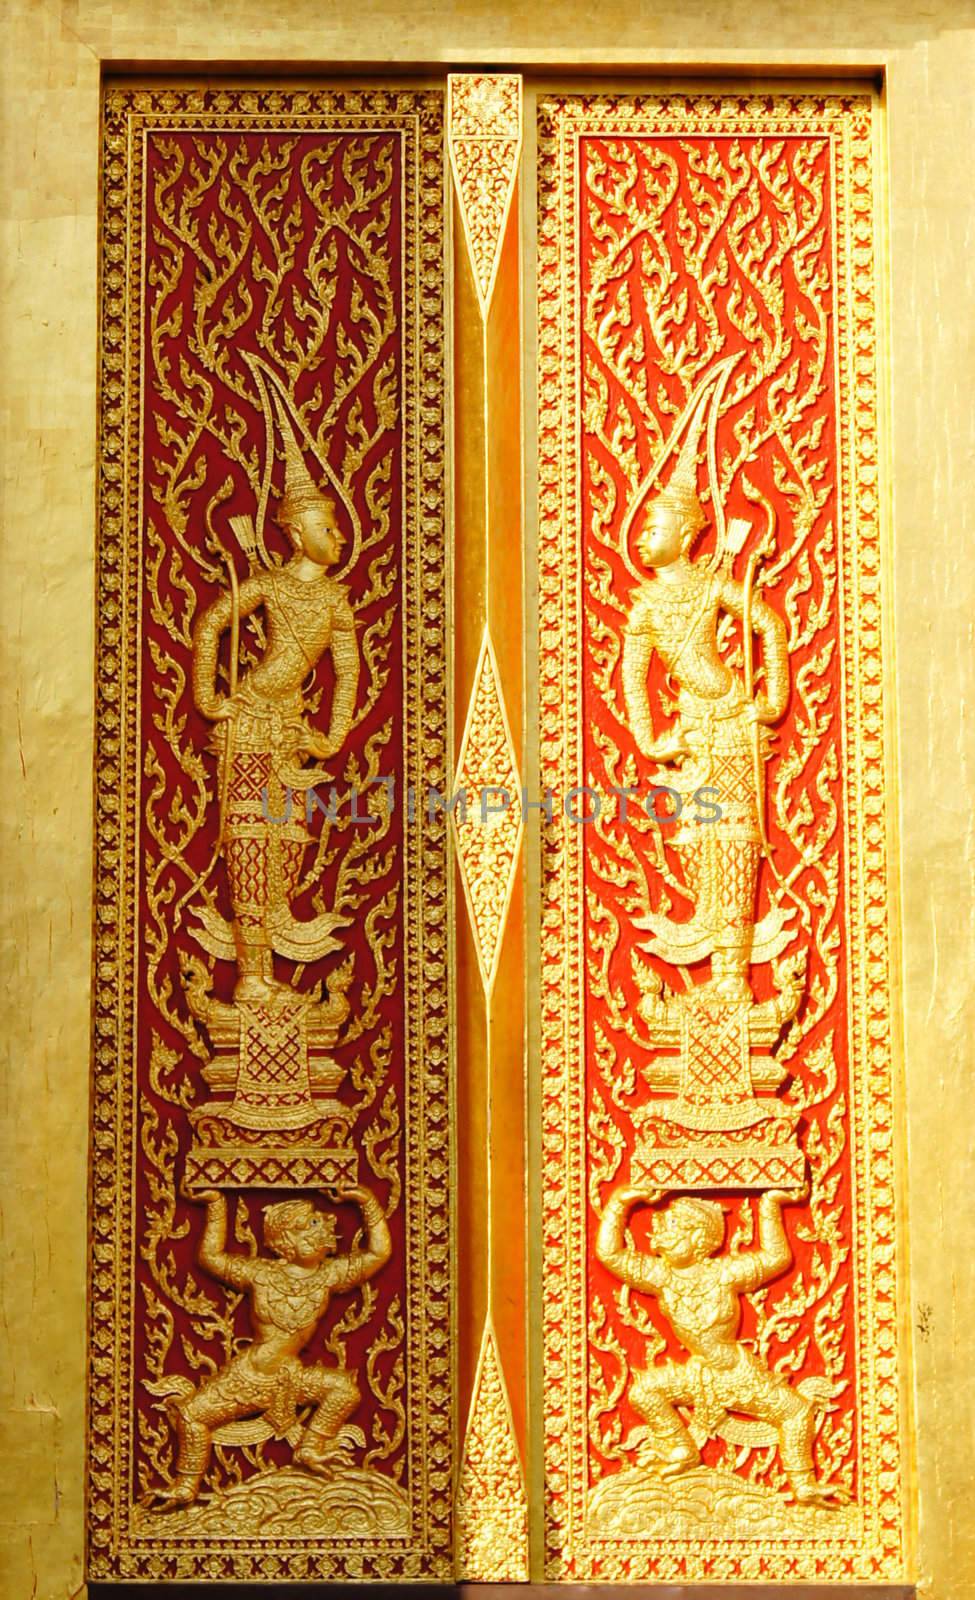 Window carving crafts of Thailand.